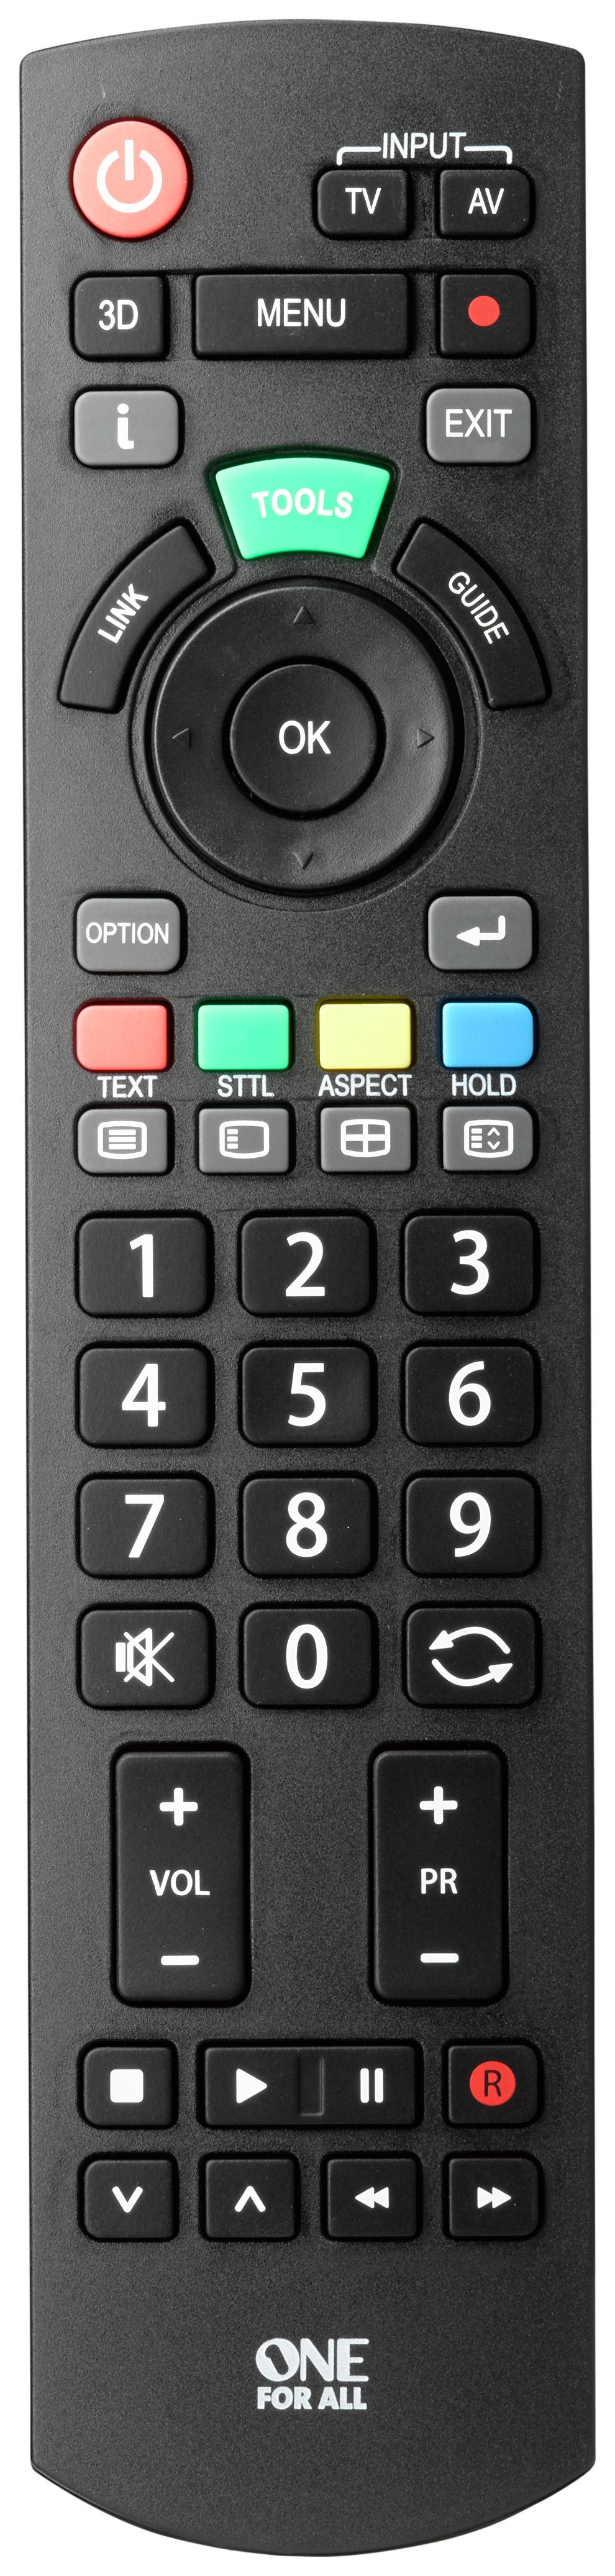 One For All Panasonic Replacement Remote Control review